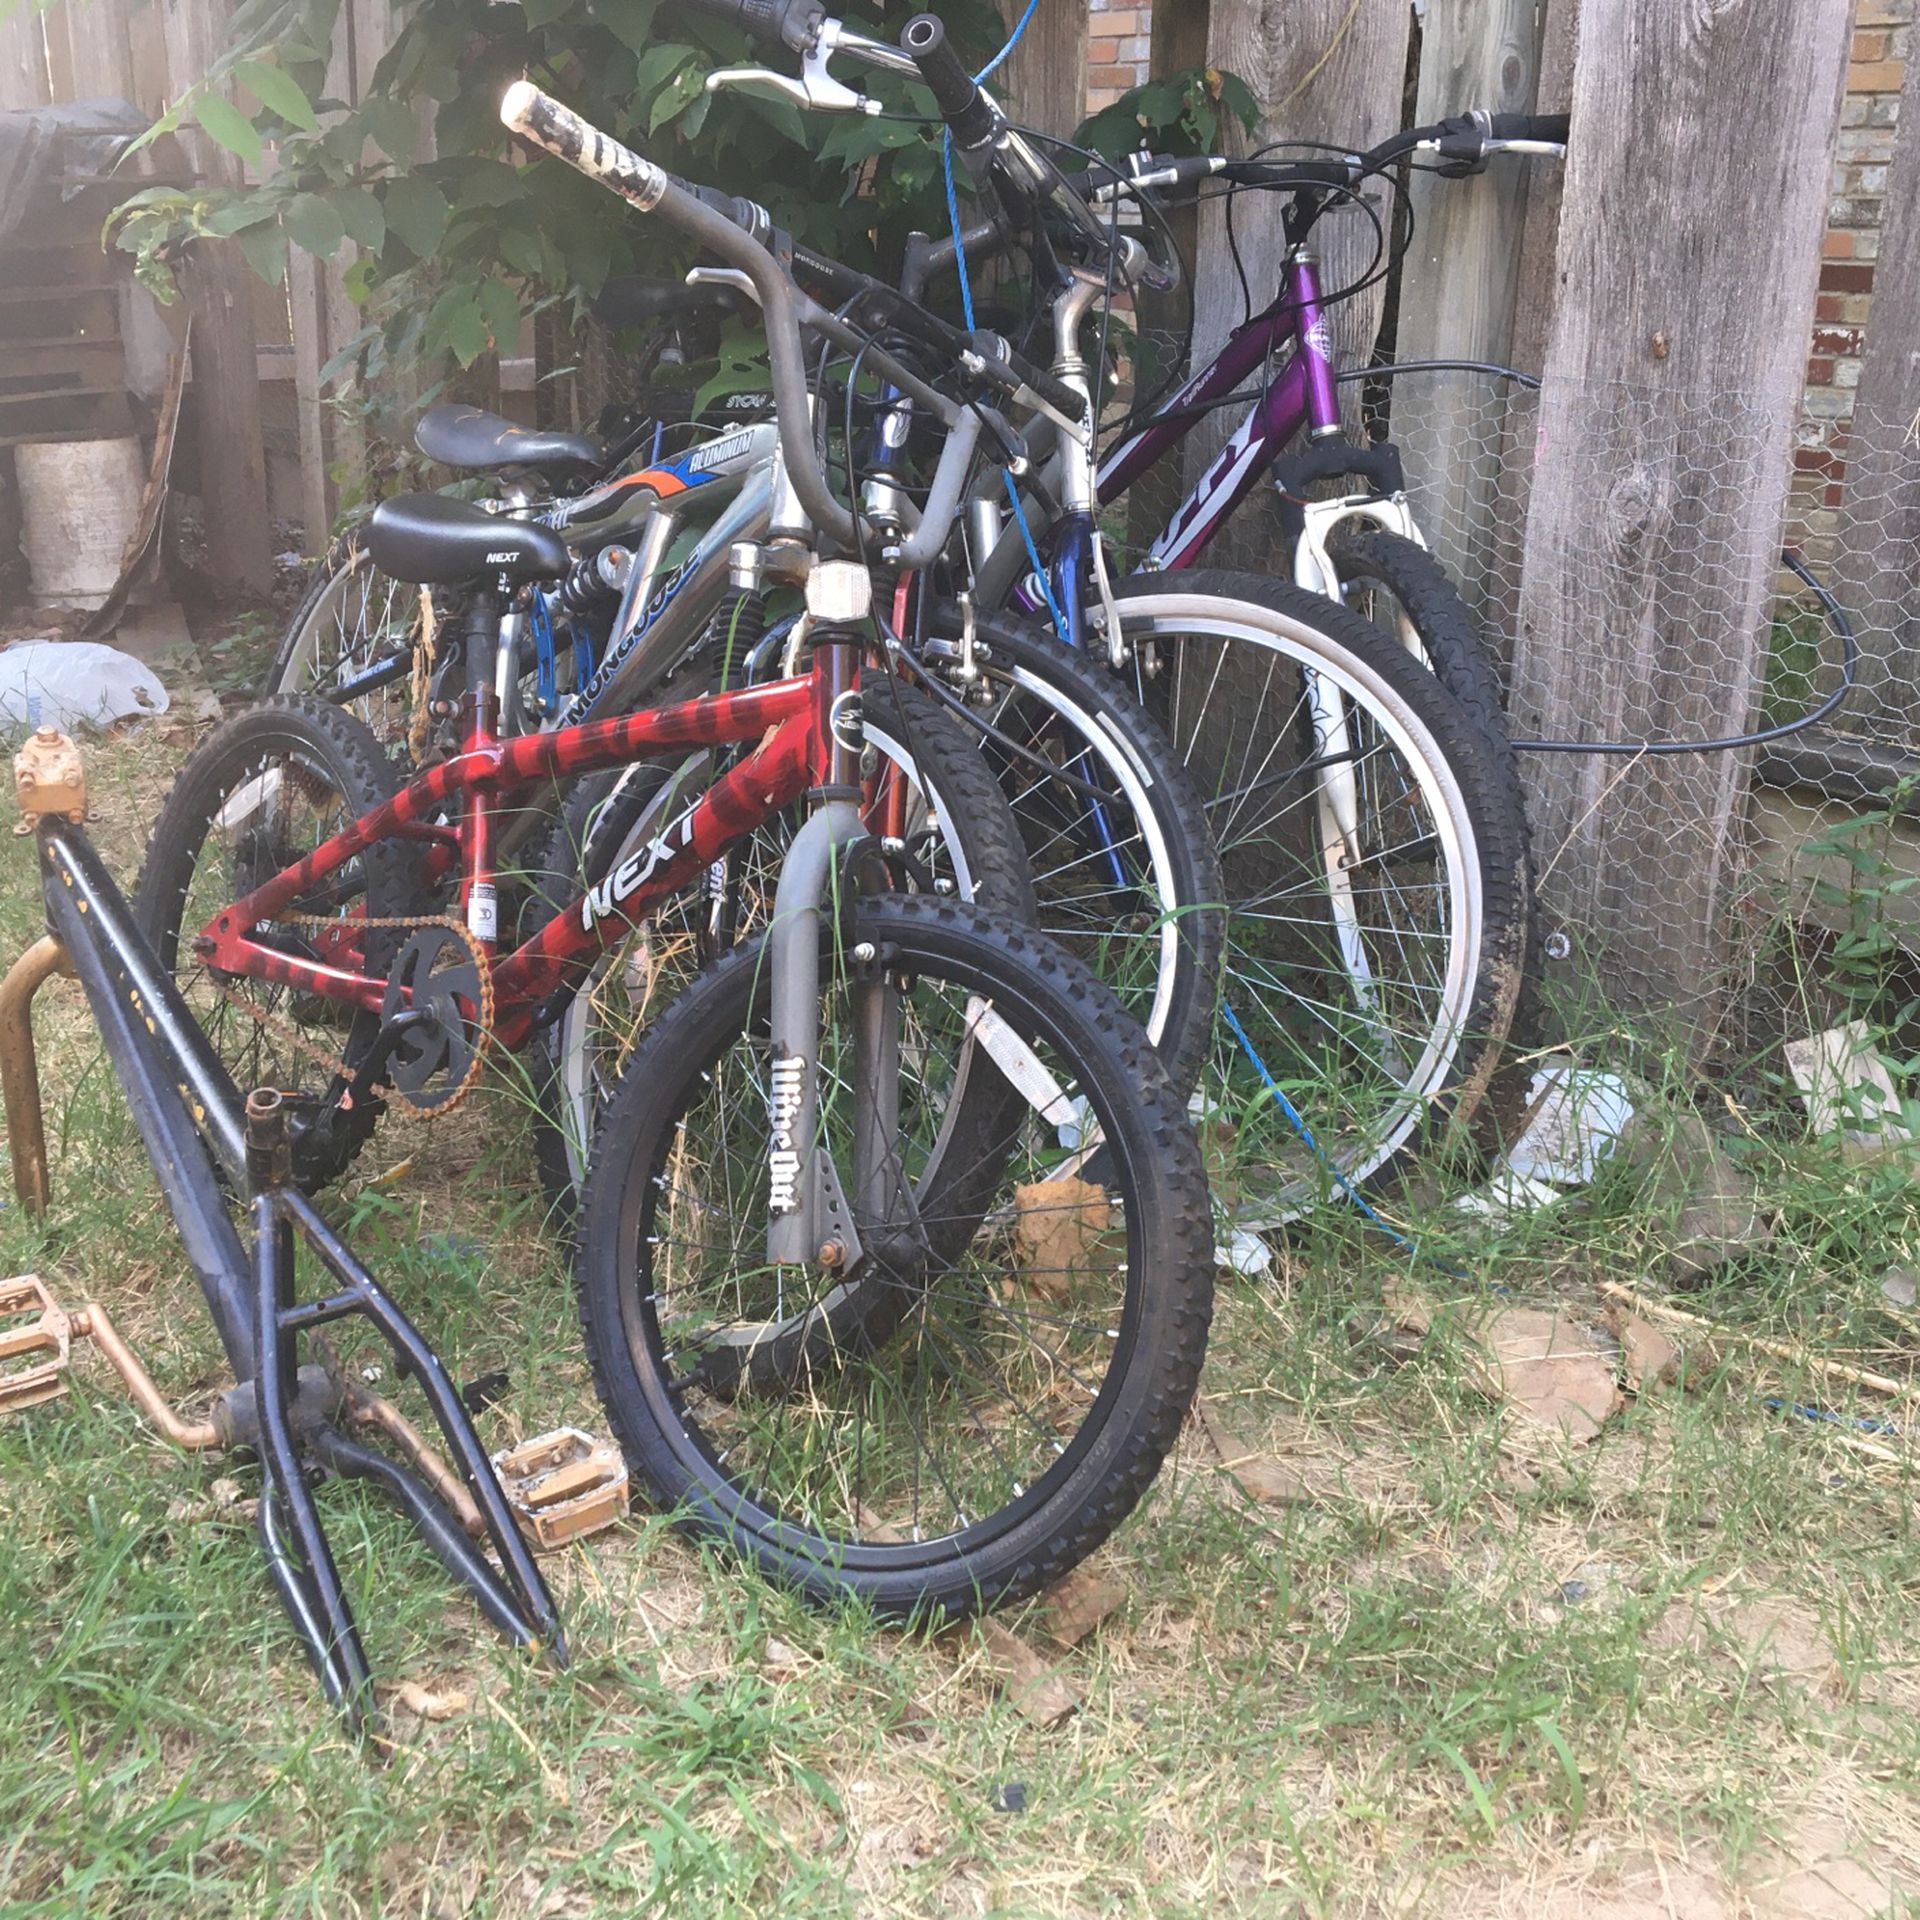 6 Bikes For Sale All In Good Condition and one BMX Frame